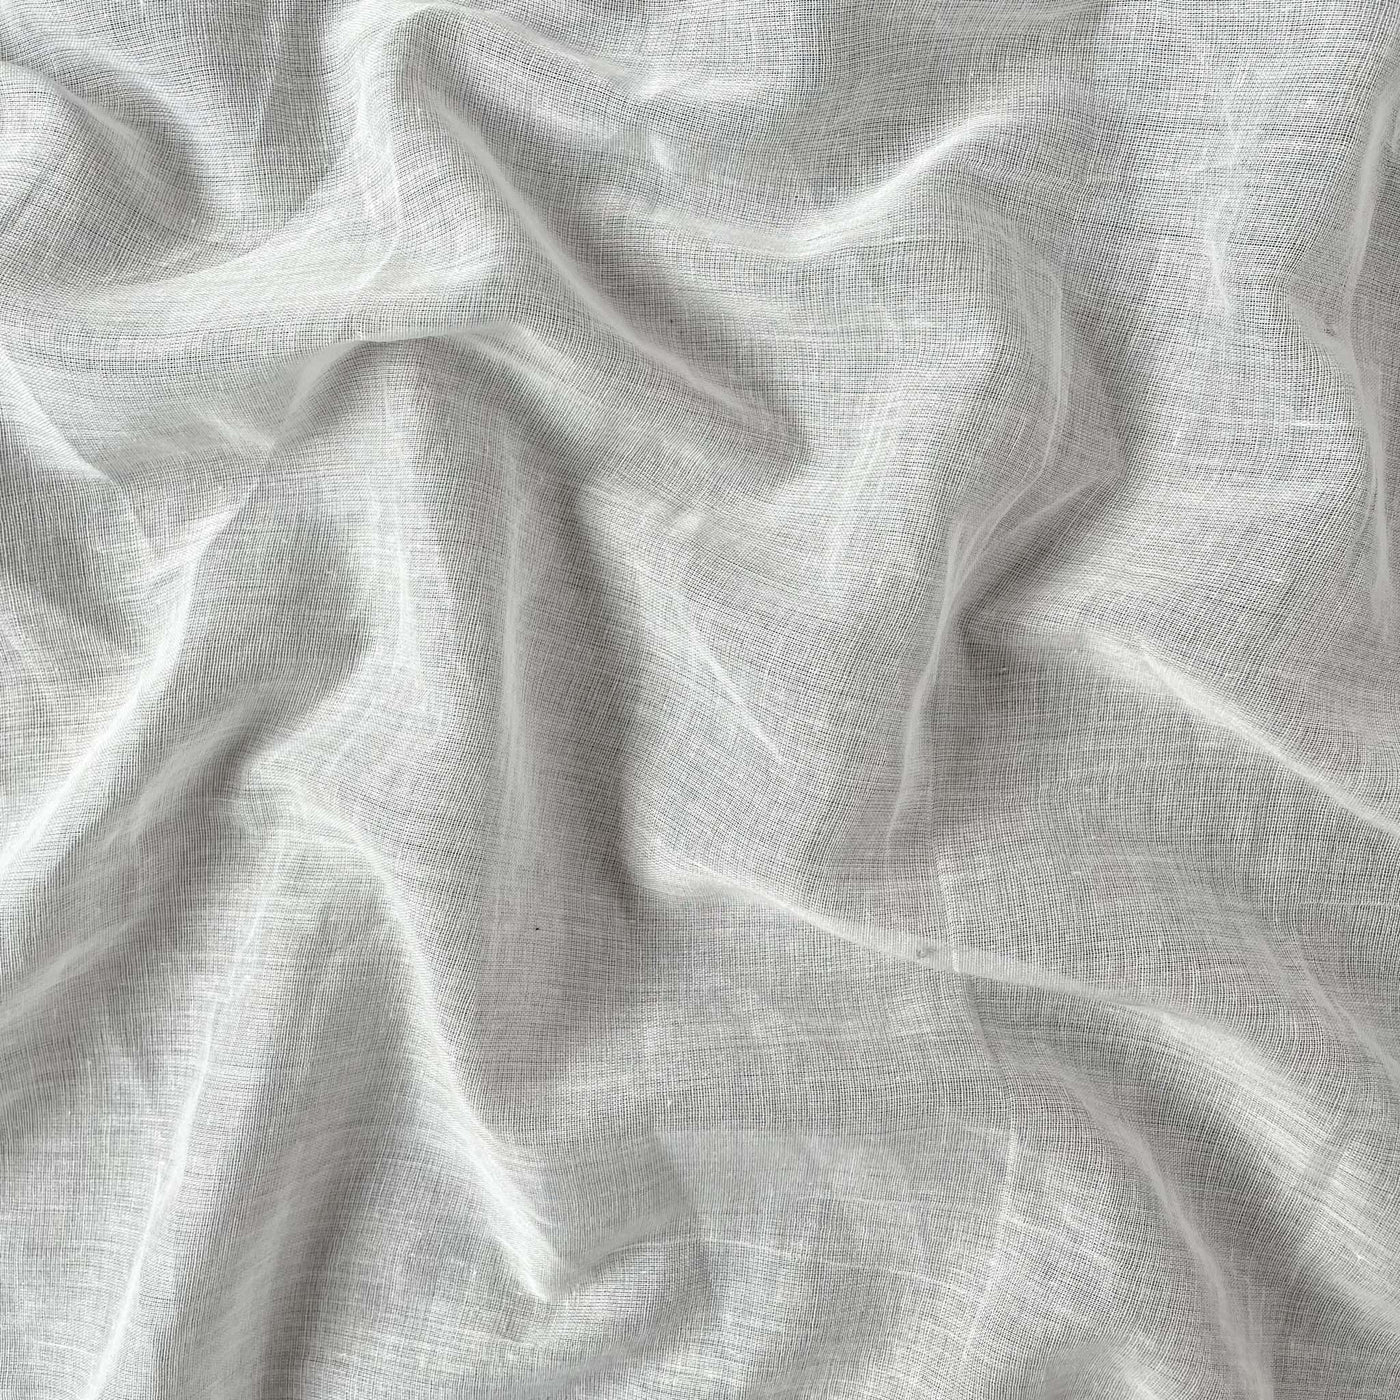 Fabric Pandit Fabric White Dyeable Pure Cotton Mul Plain Fabric (Width 42 Inches, 38 Gms)